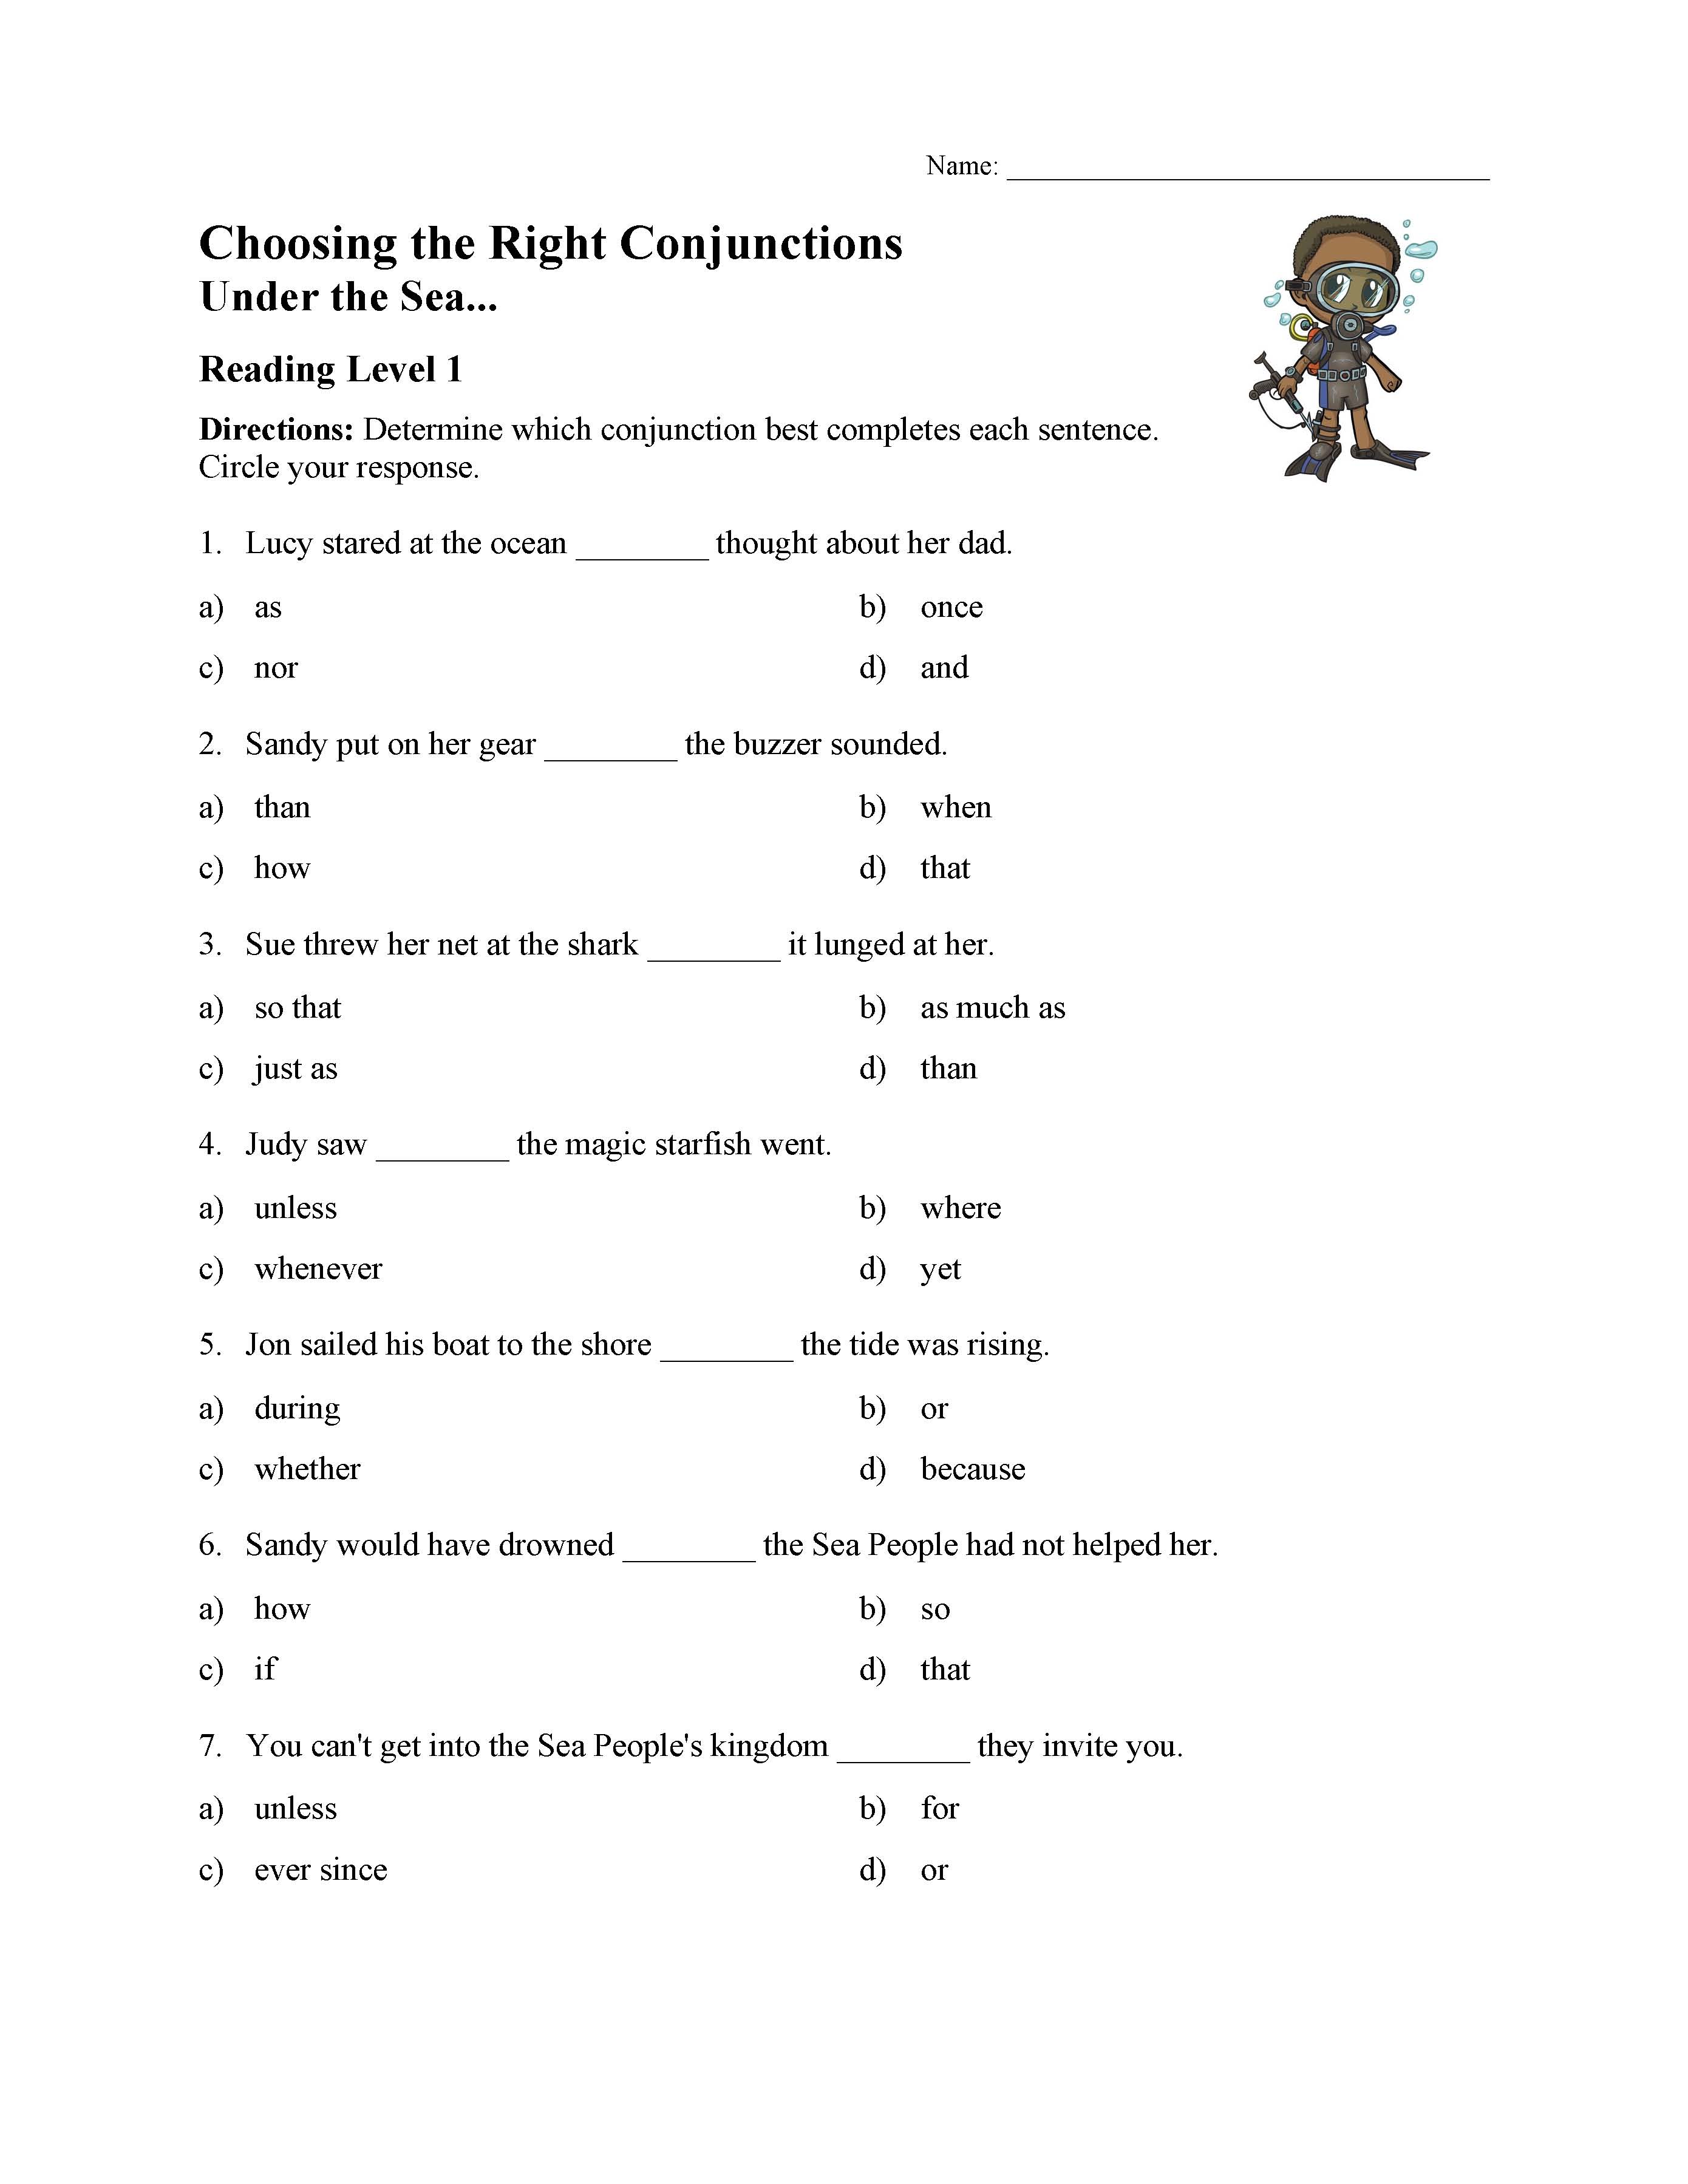 choosing-the-right-conjunction-worksheet-reading-level-1-preview